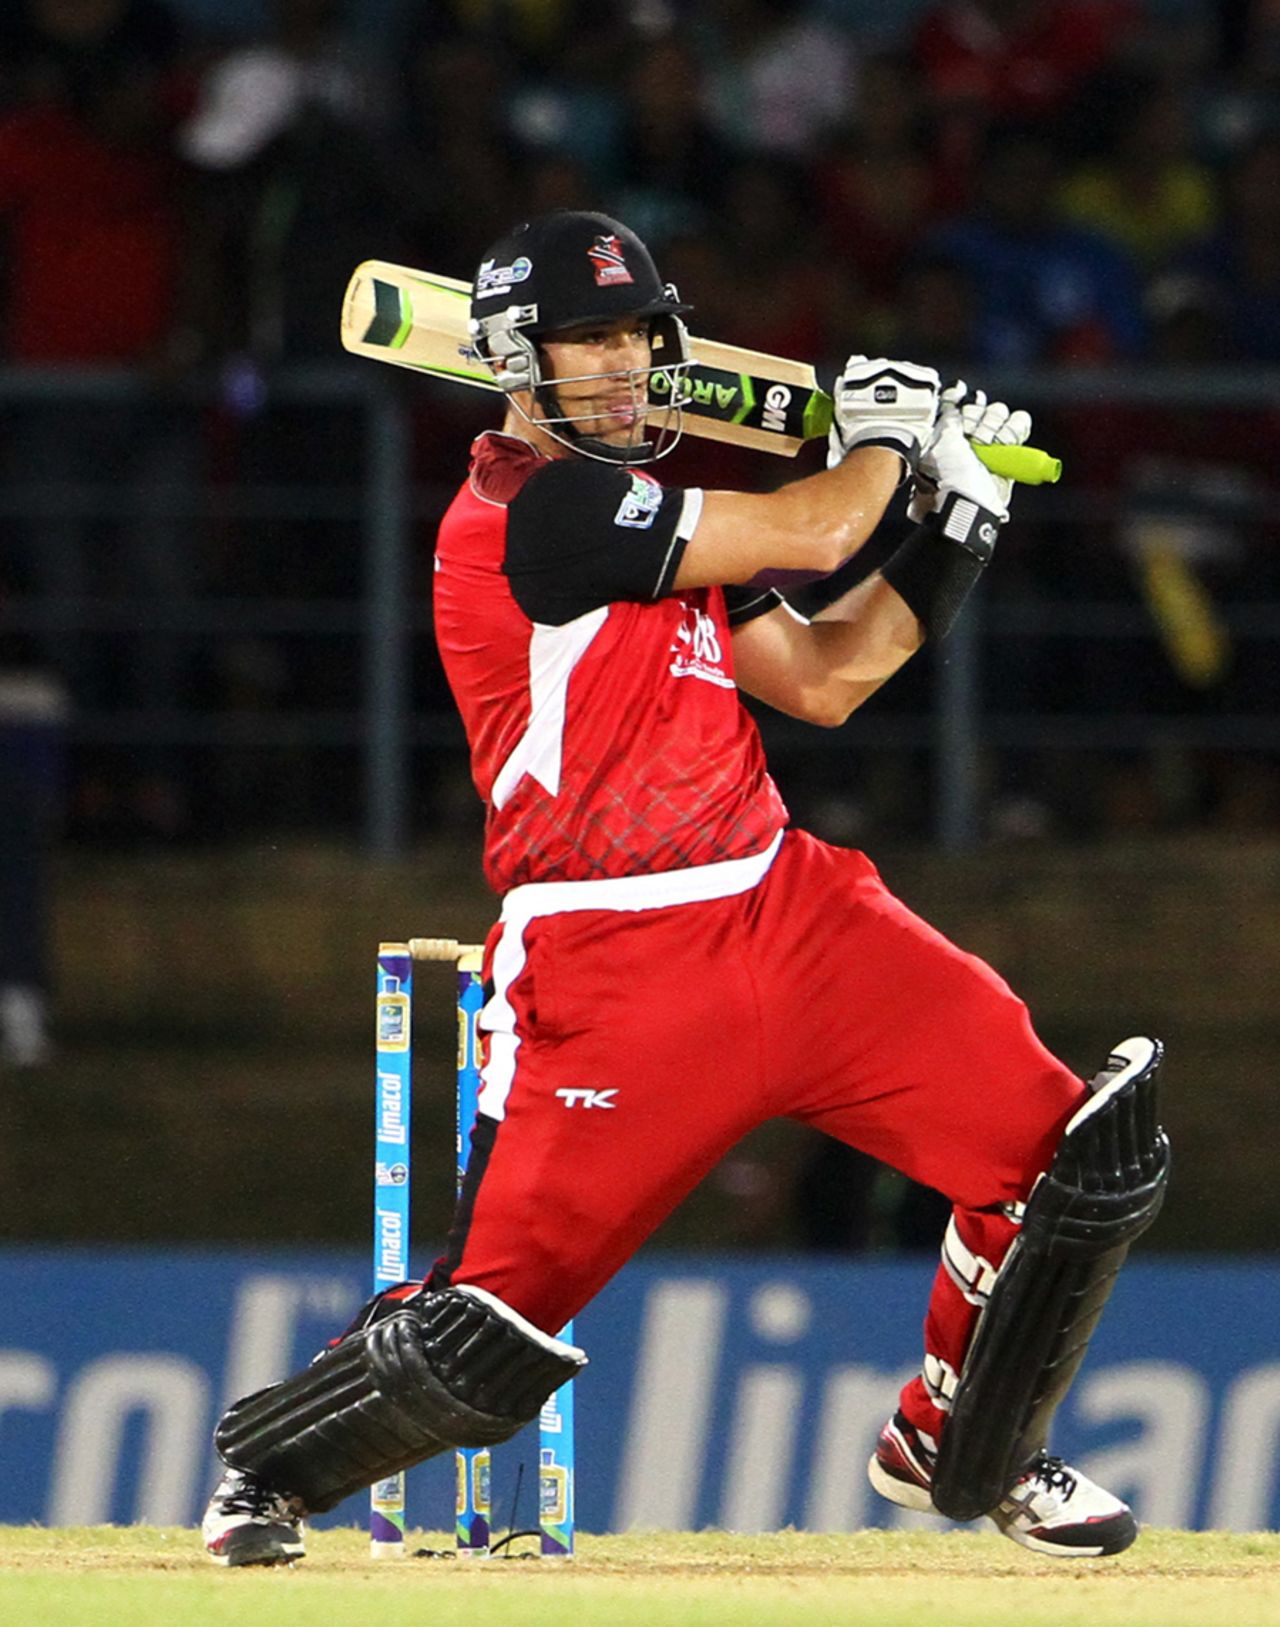 Ross Taylor swats one to midwicket during his cameo, Trinidad & Tobago Red Steel v Antigua Hawksbills, Caribbean Premier League, Port-of-Spain, August 11, 2013
